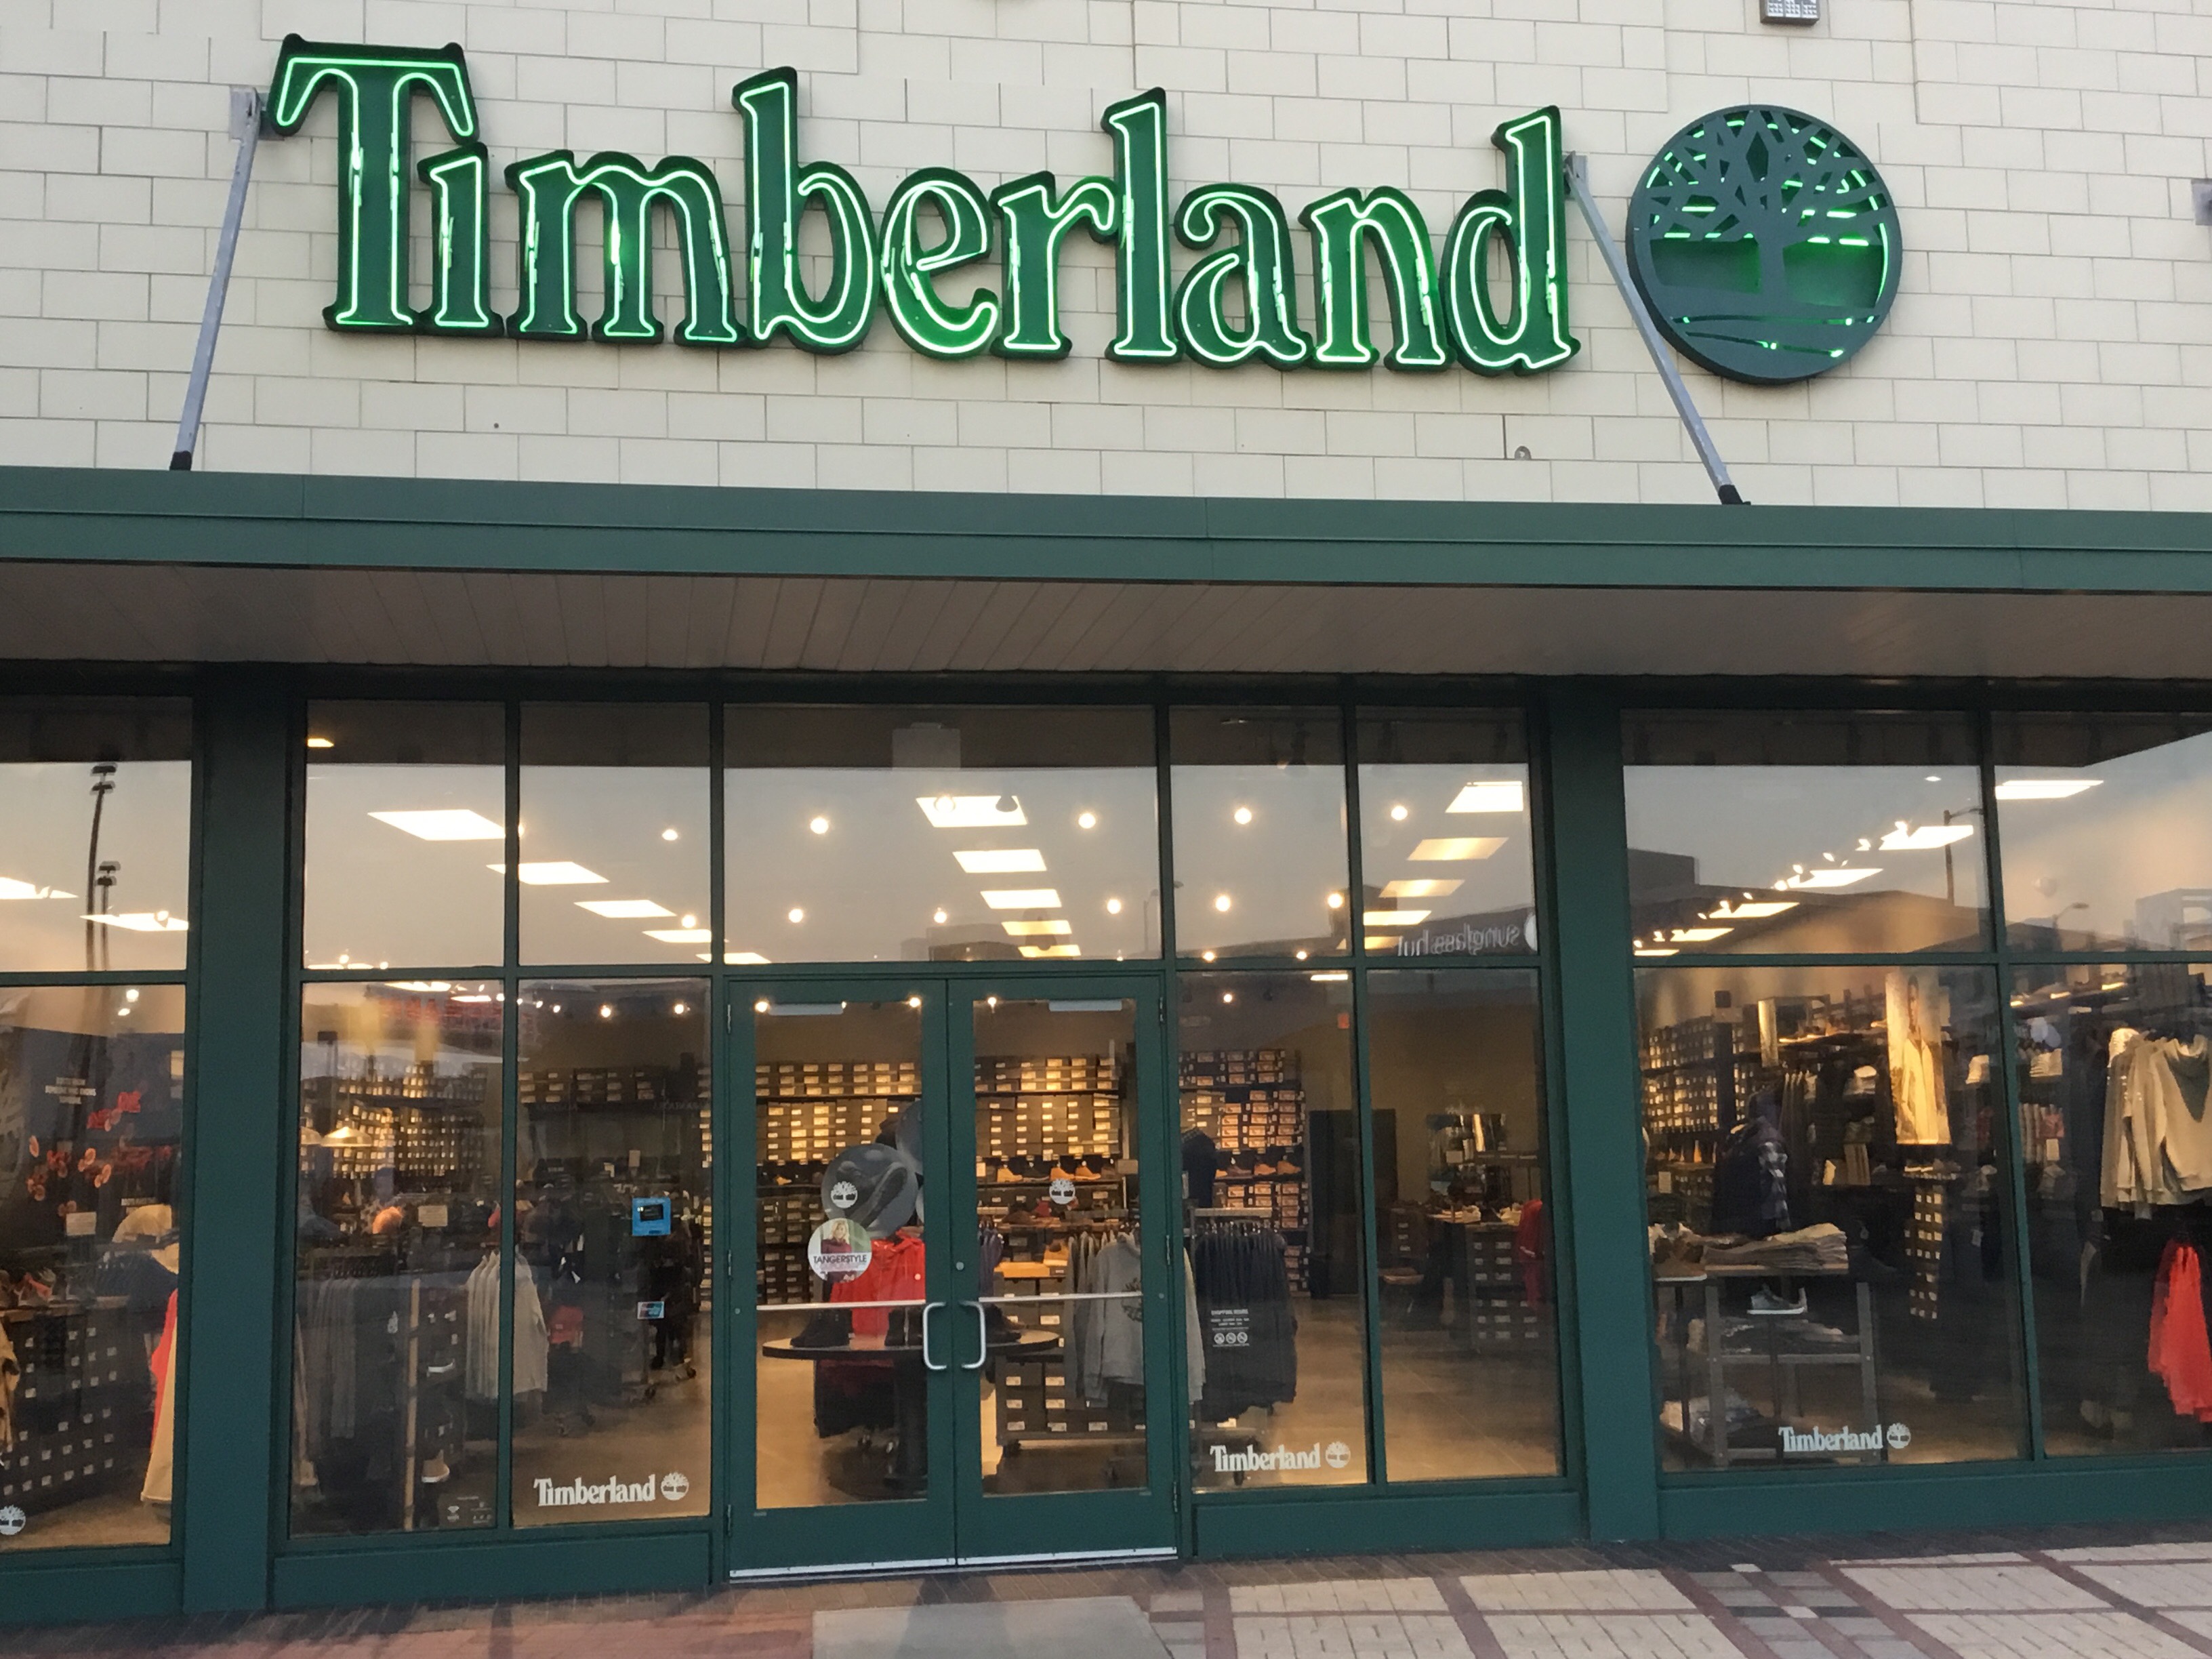 Timberland - Boots, Shoes, Clothing 